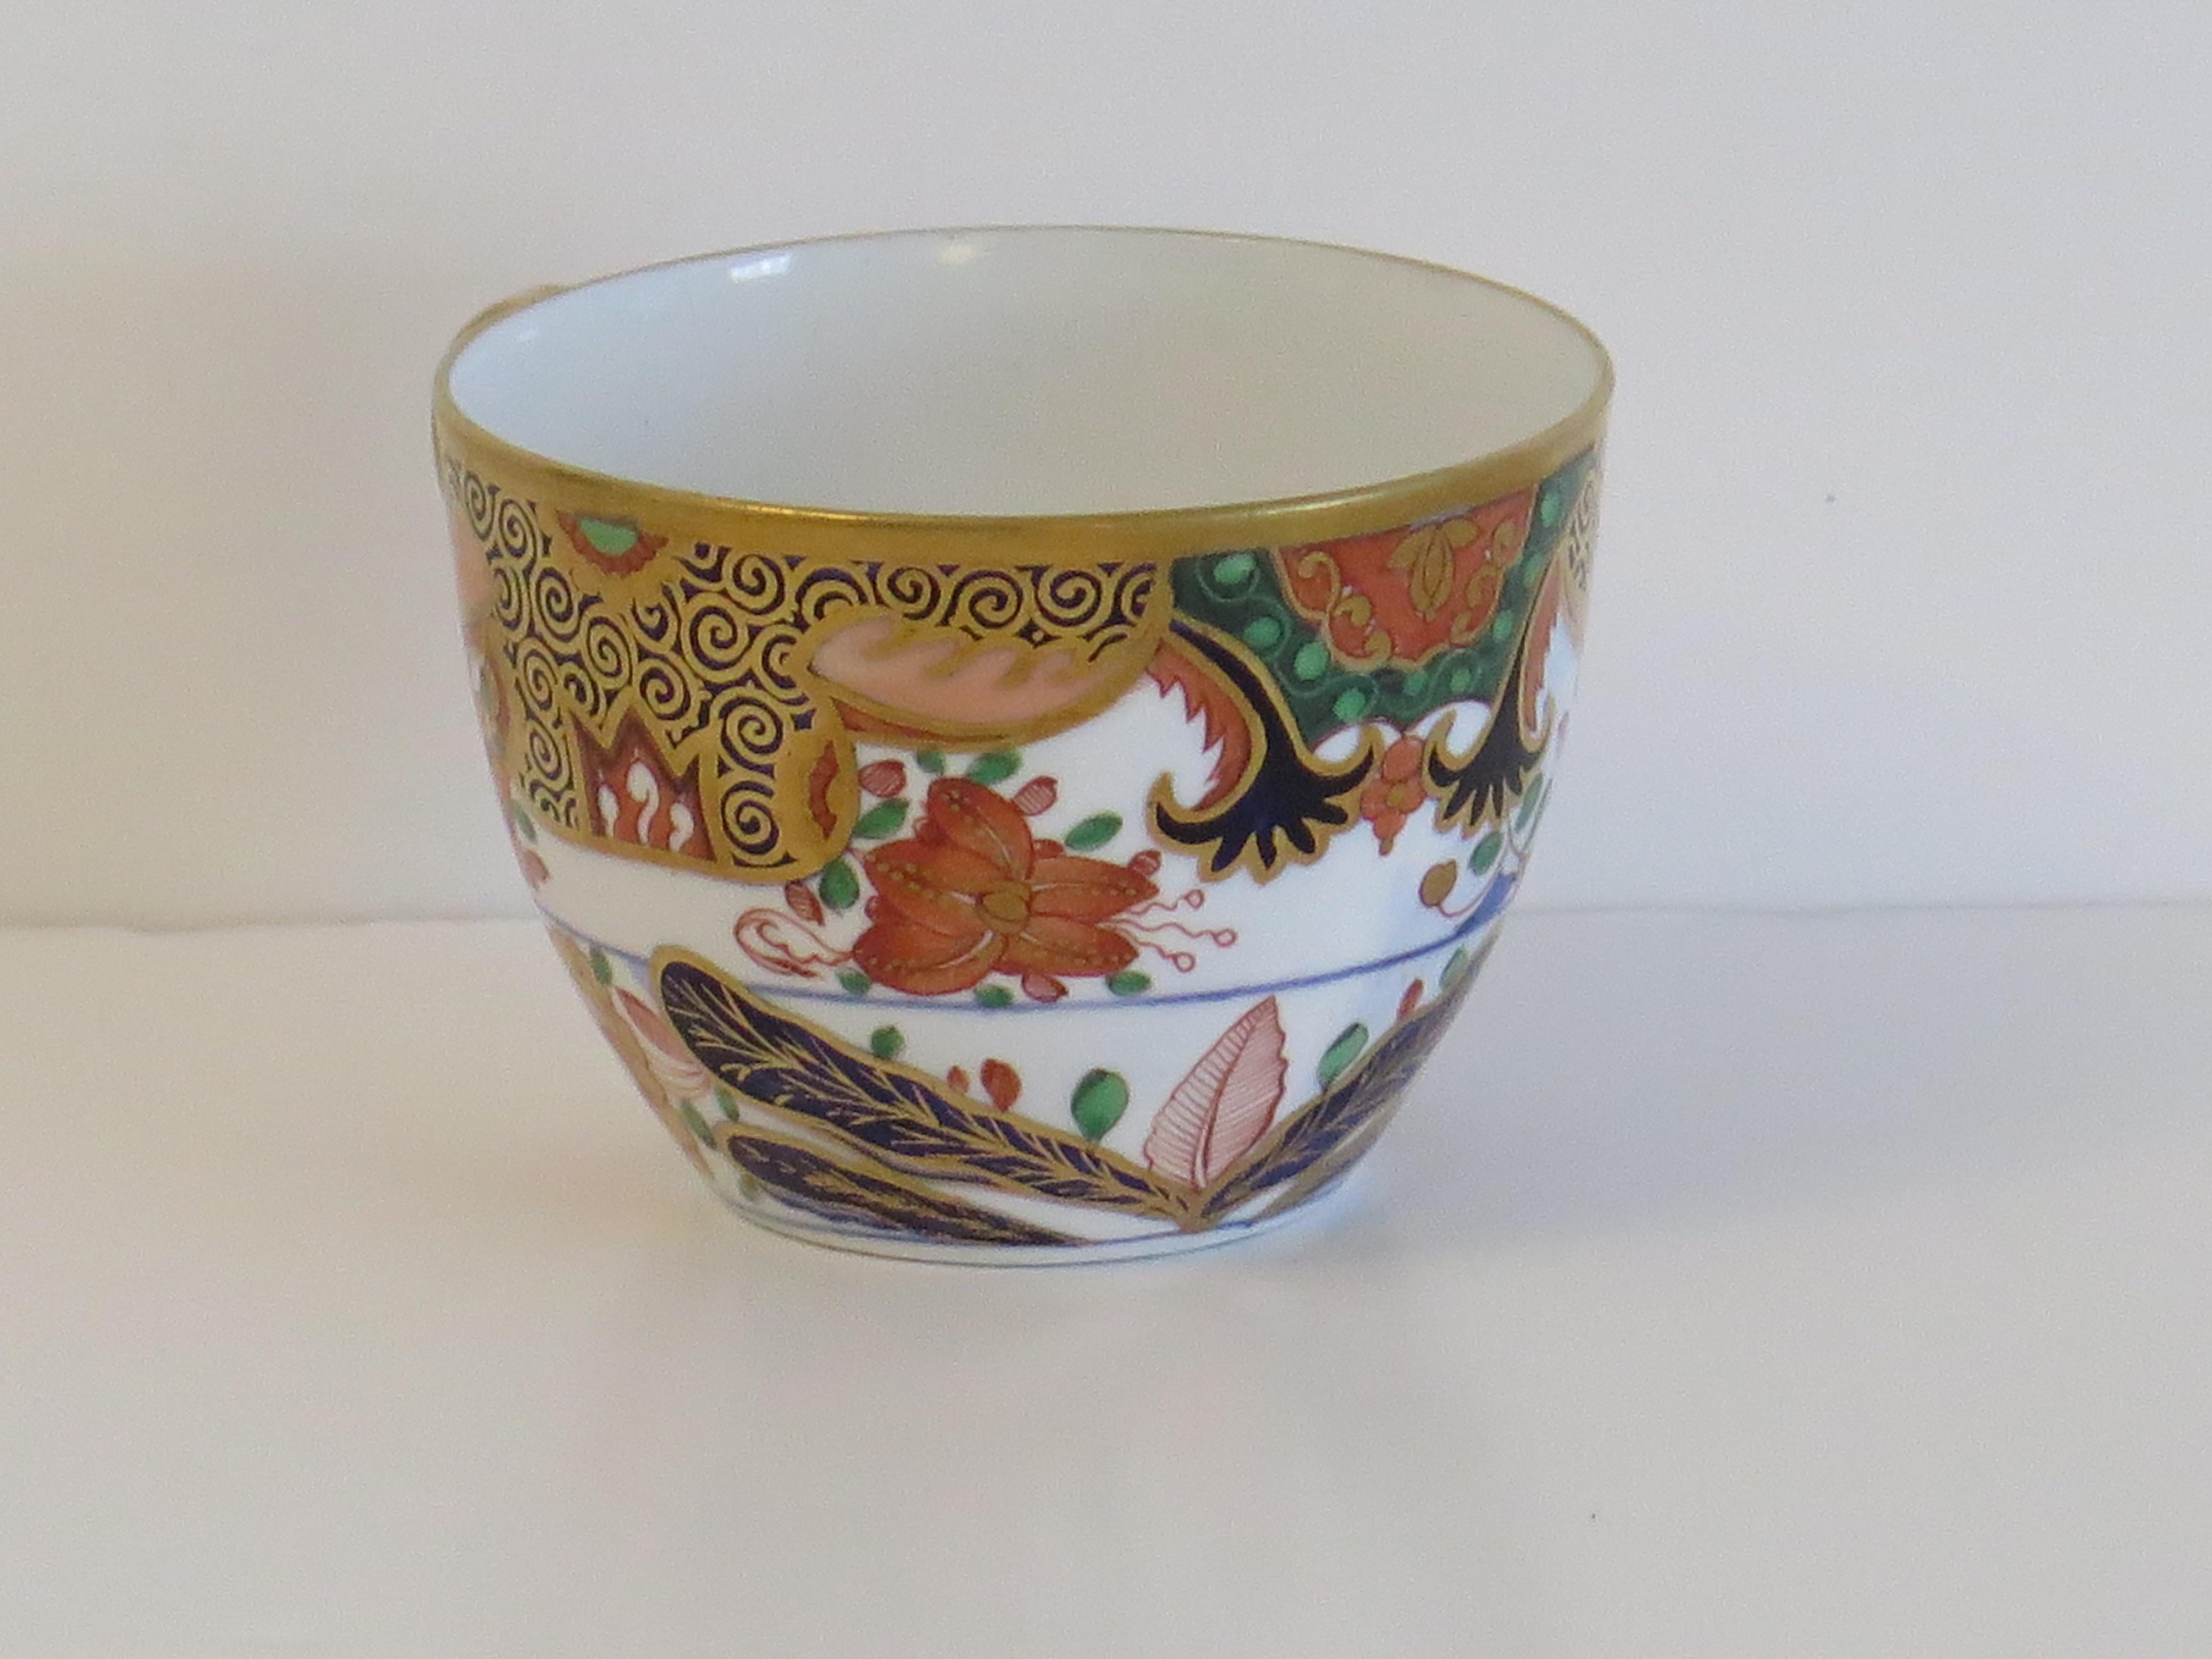 Spode Porcelain Tea Cup in Hand Painted & Gilded Pattern 967, circa 1810 For Sale 2